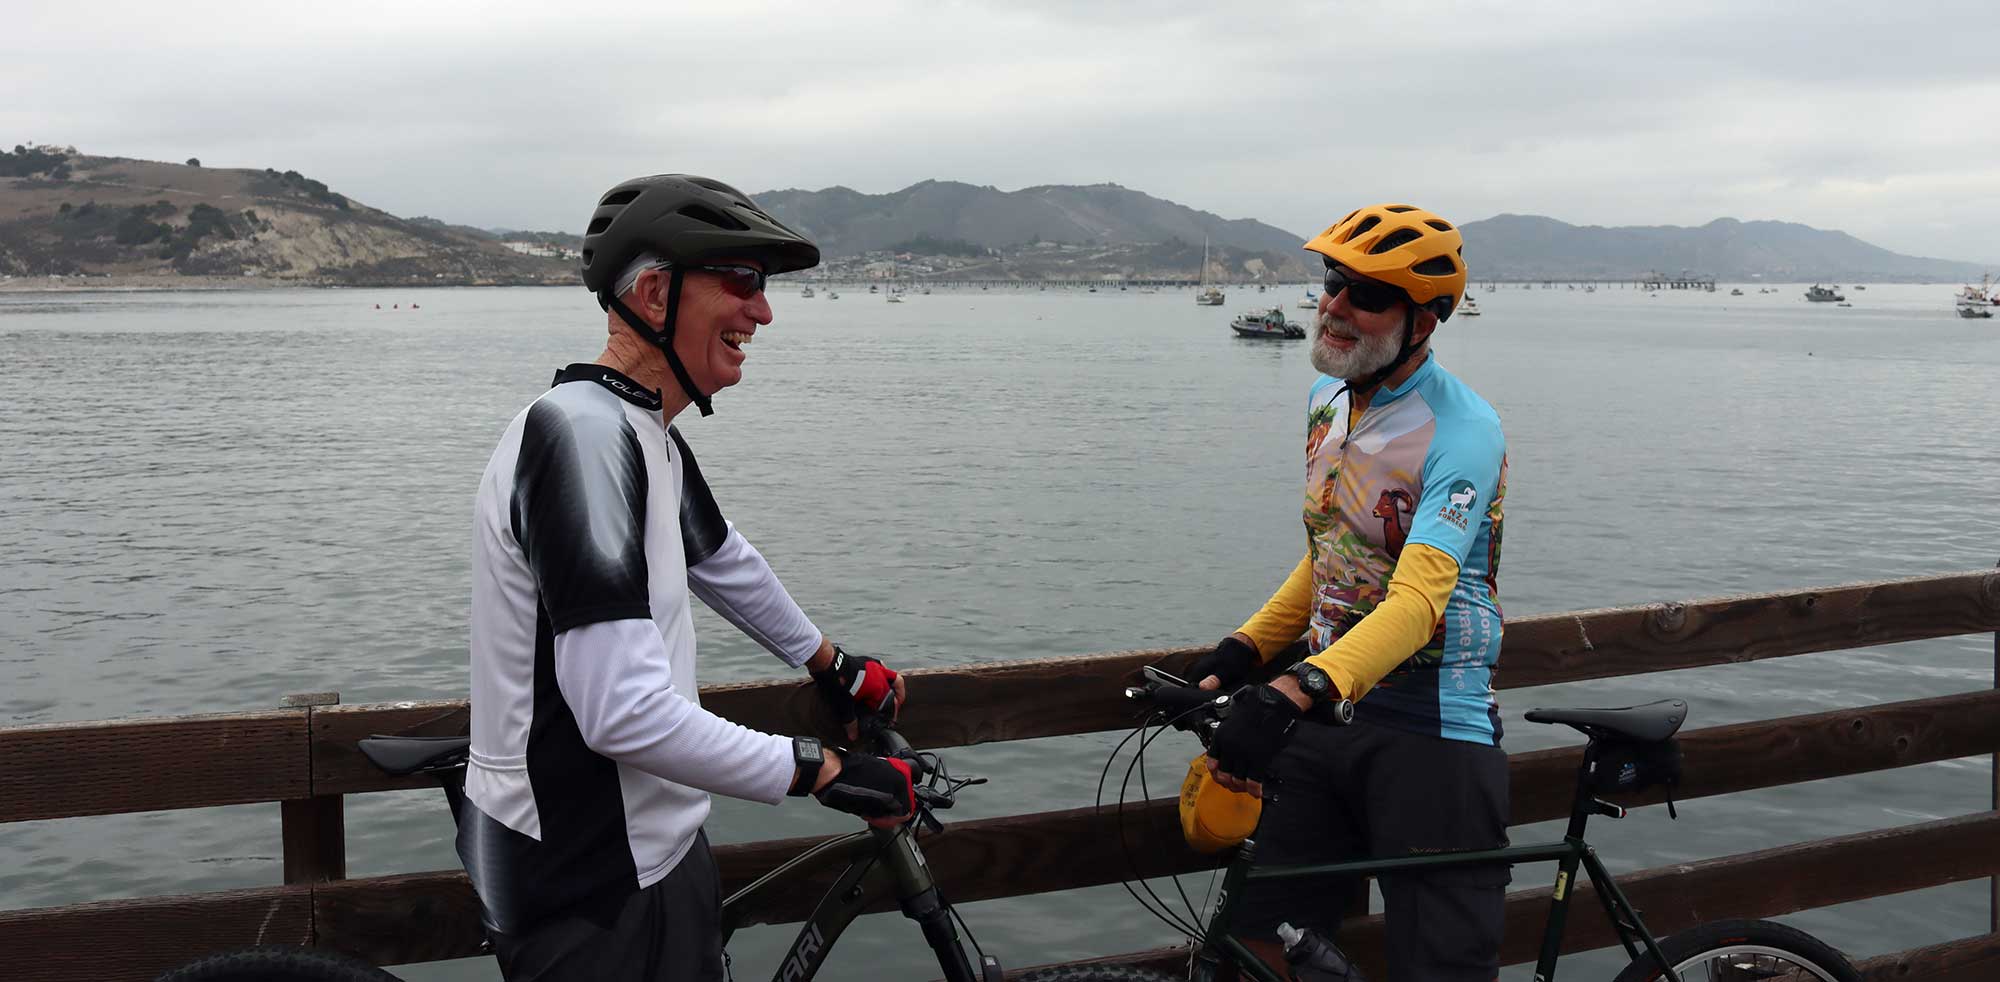 A cyclist with hearing loss in conversation on a bridge overlooking the bay.